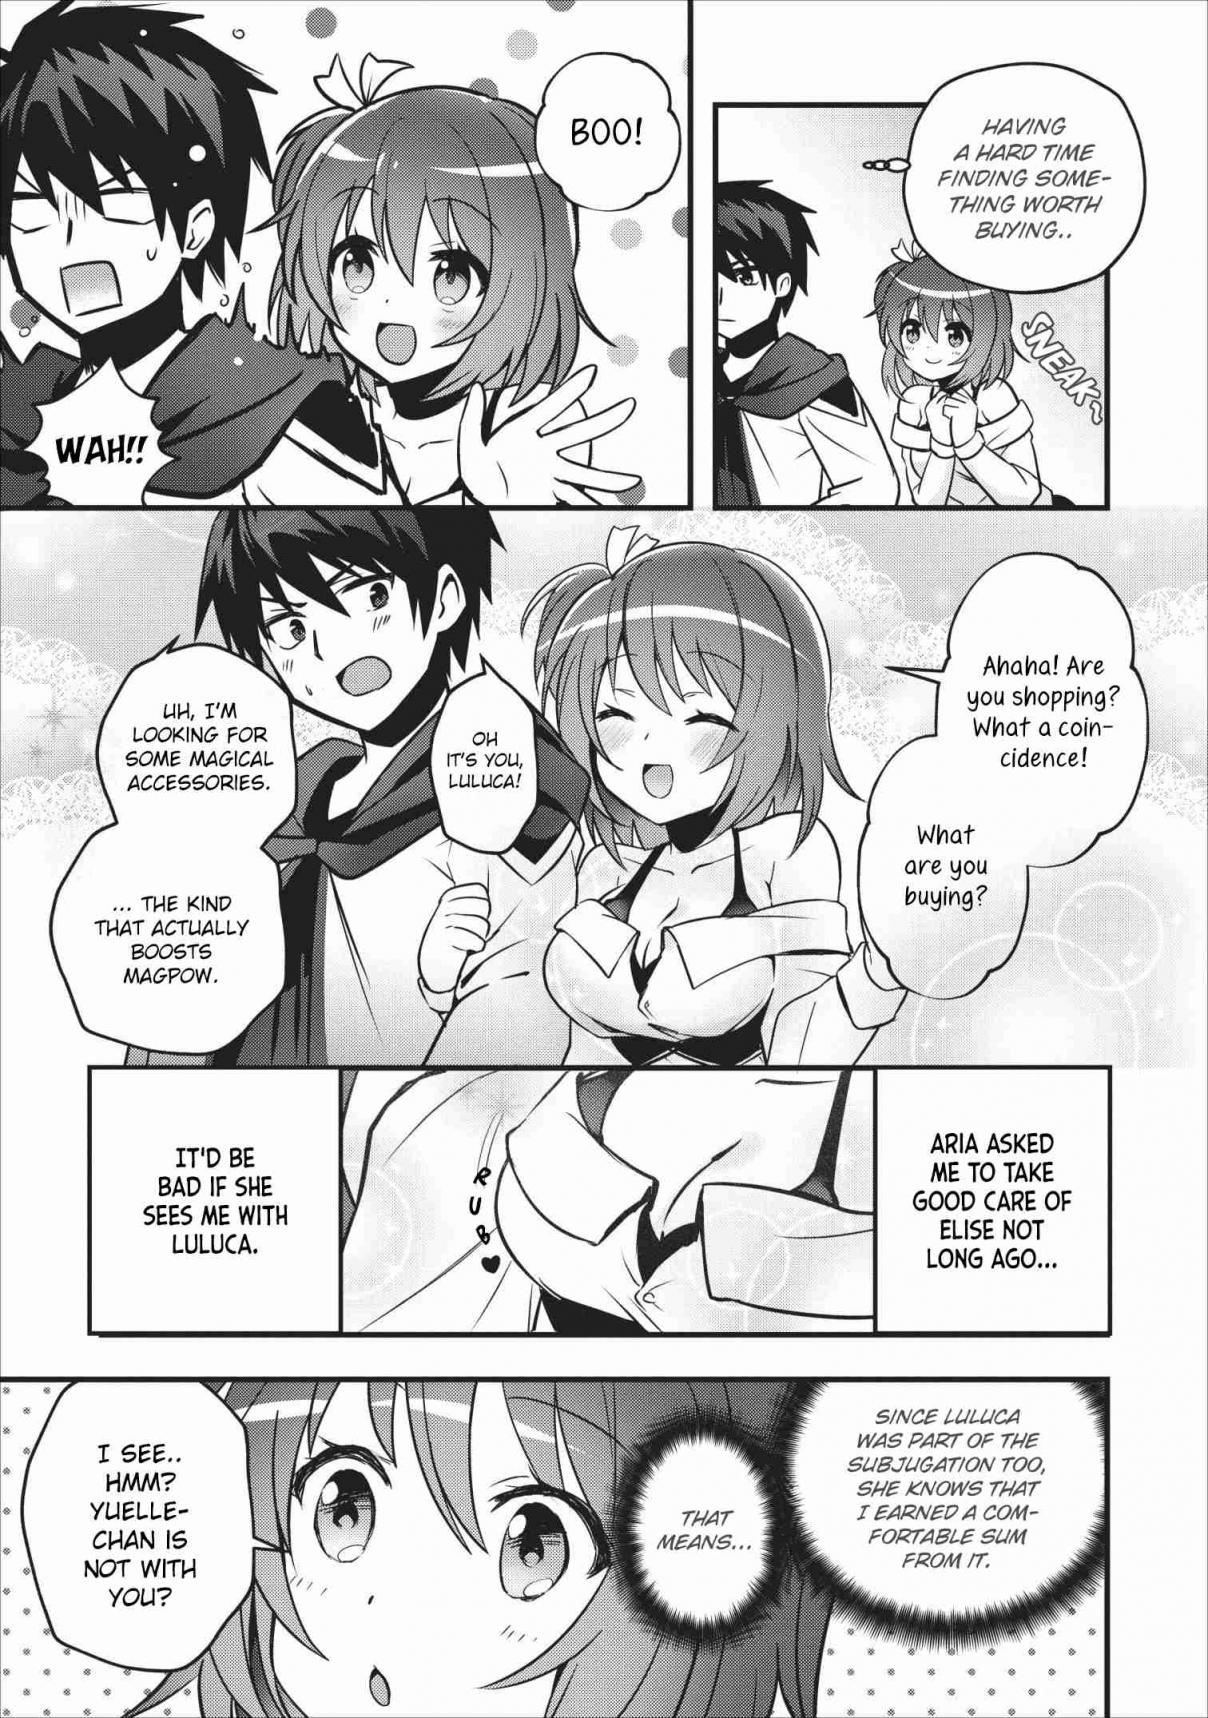 I Work As A Healer In Another World's Labyrinth City Vol. 3 Ch. 12